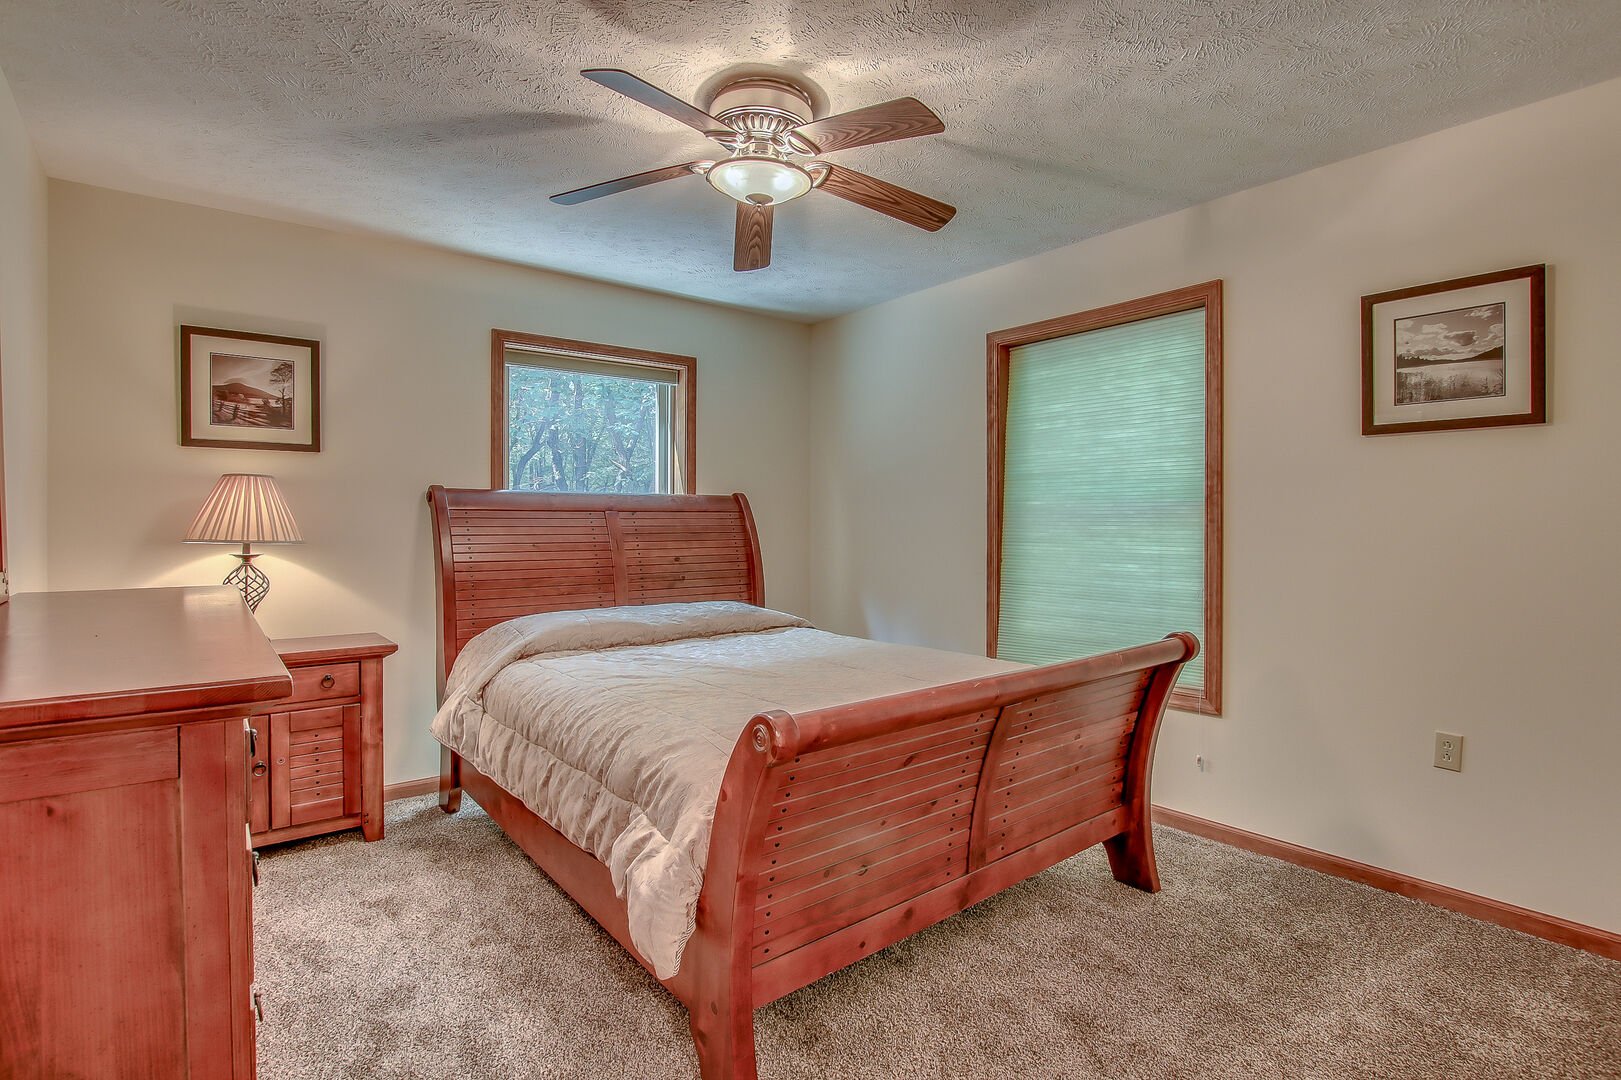 Bed in the center of a bedroom, with a nightstand and dresser to the right, a window to the left.